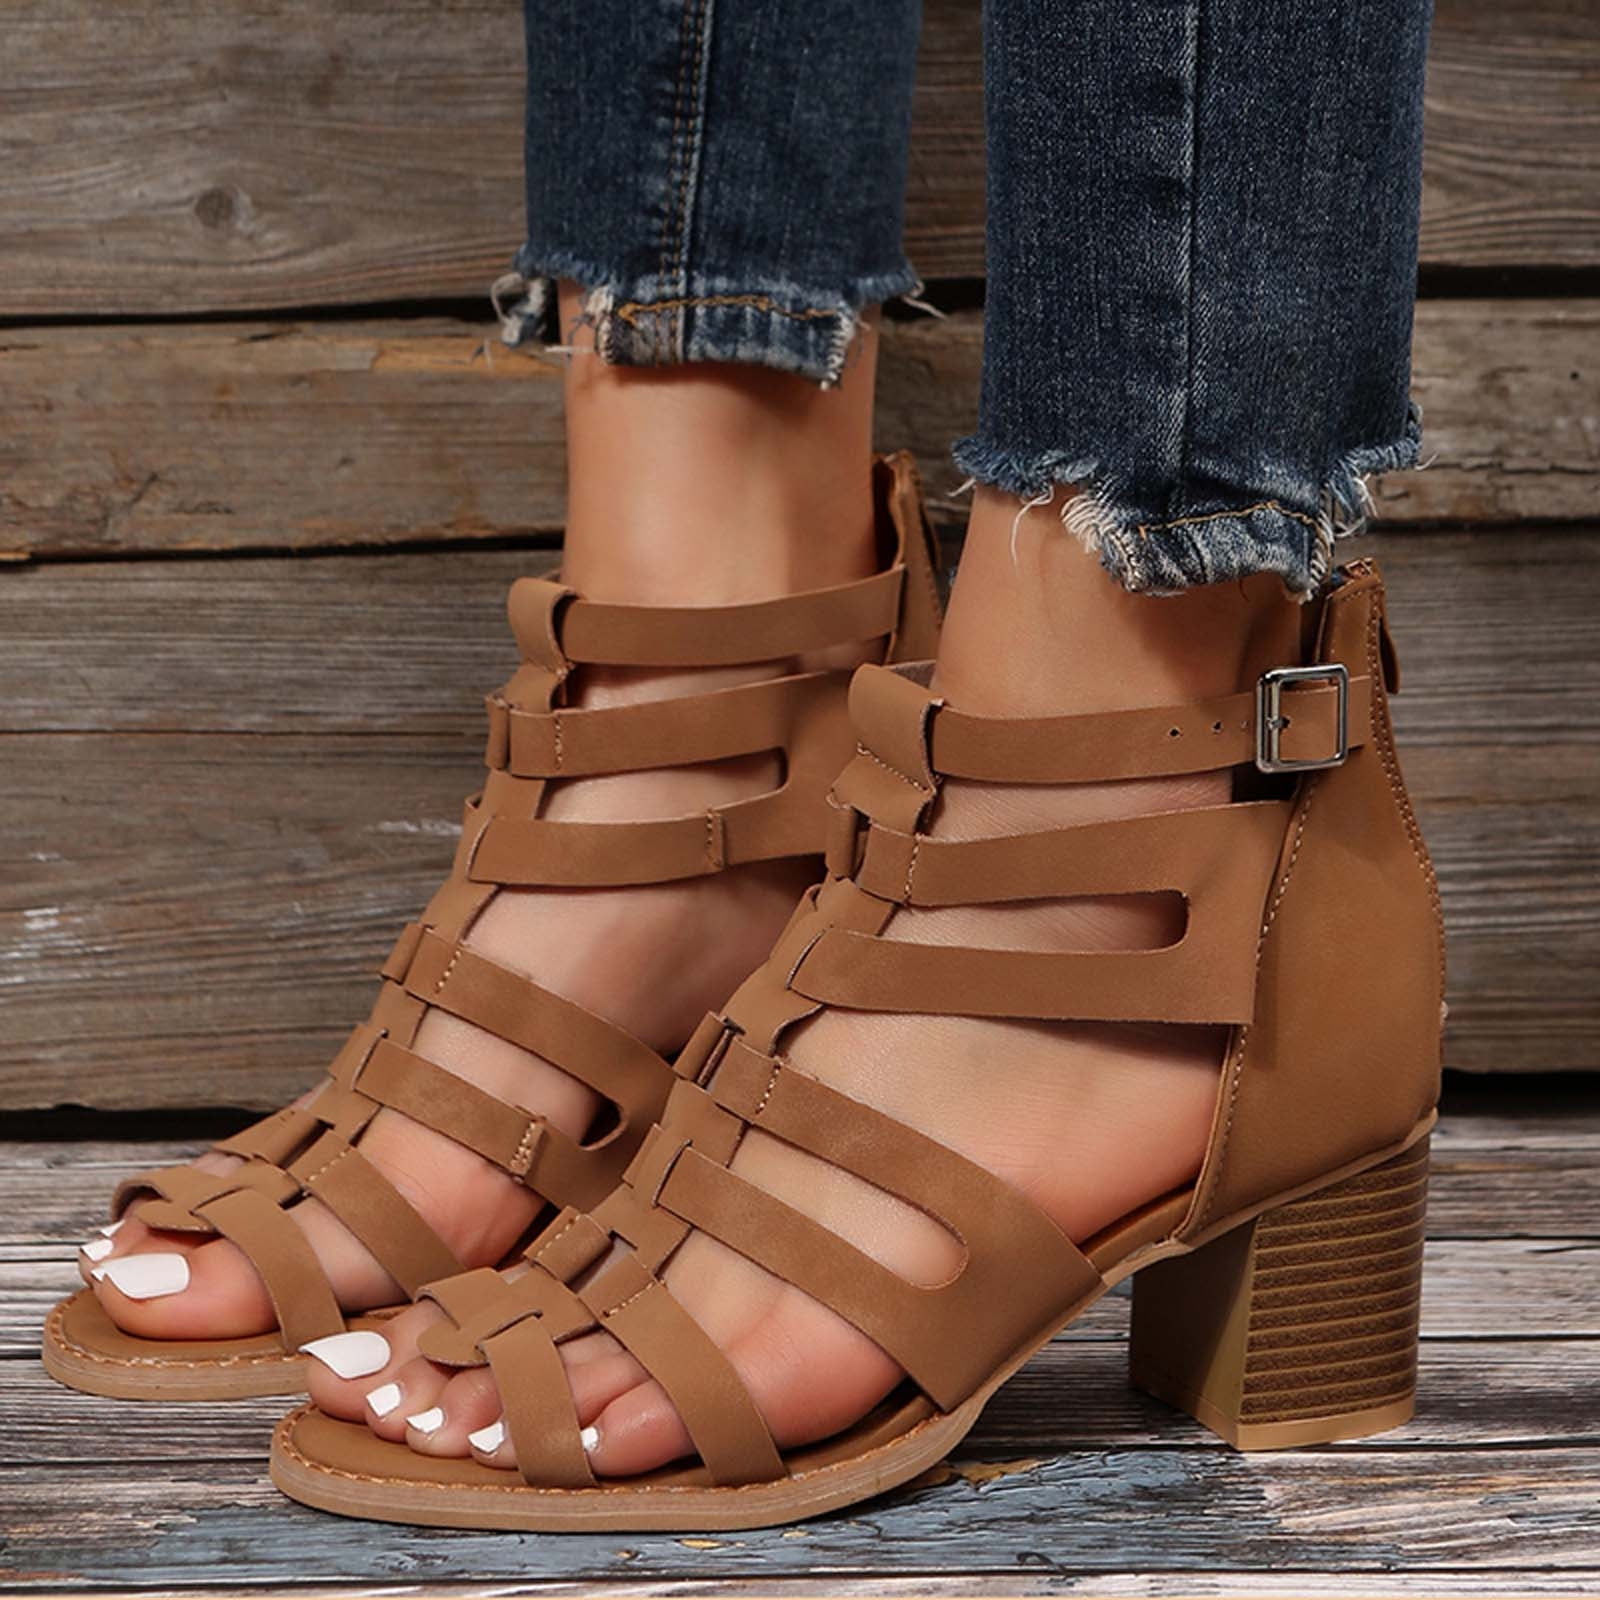 Women Cut Out Rome Gladiator Sandals Wedge Heels Peep Toe Zip Real Leather  Shoes | eBay